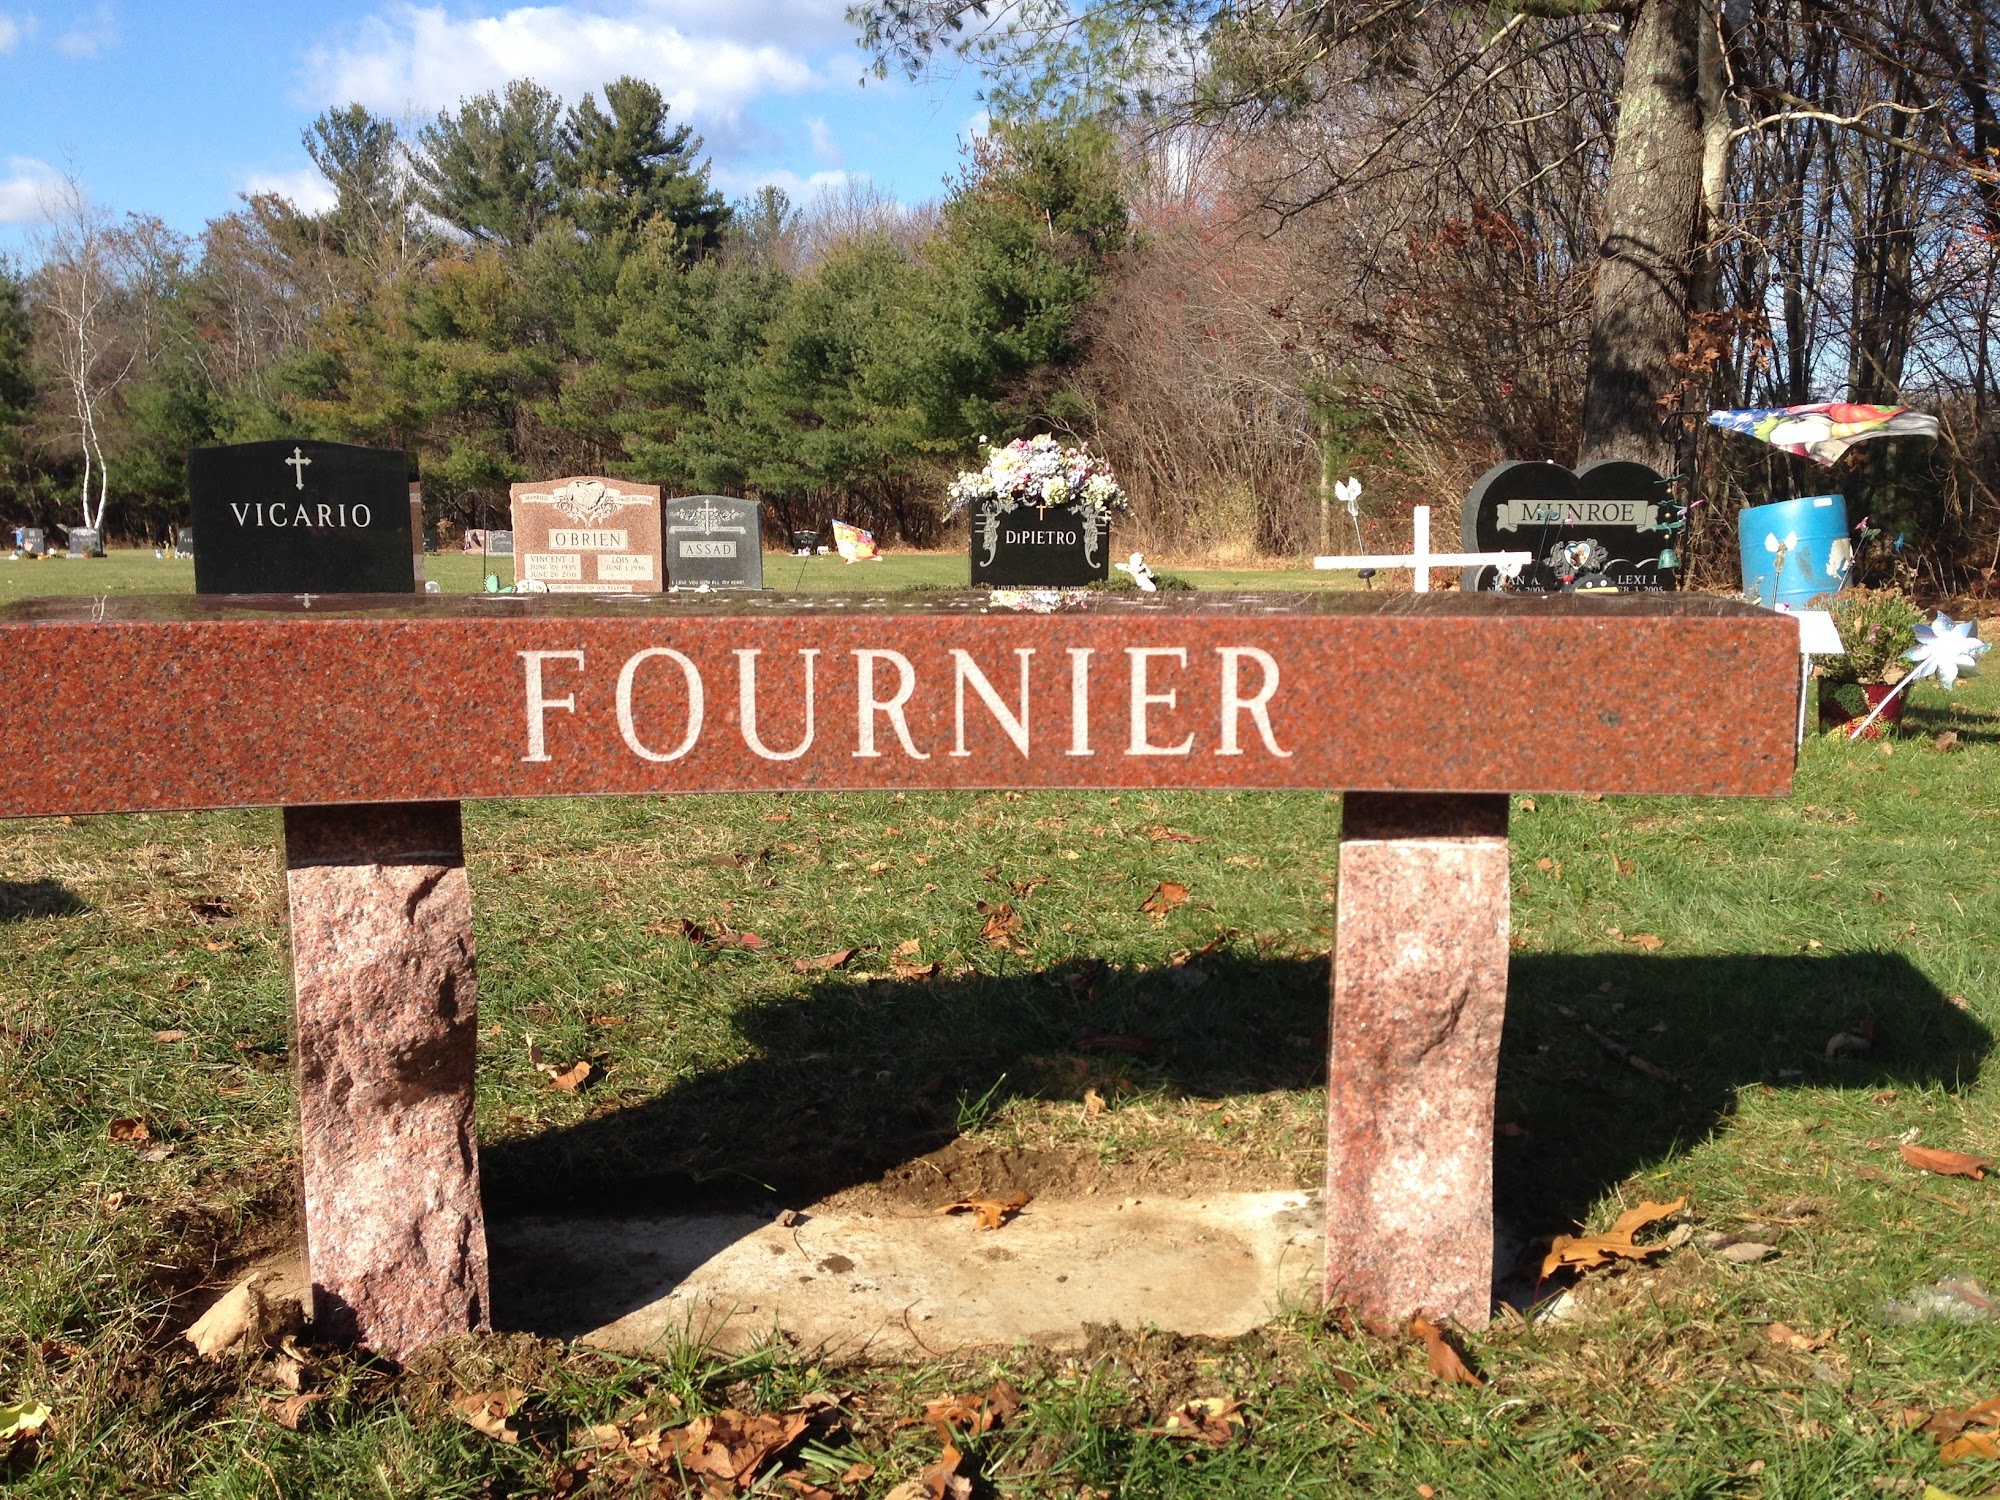 Tribute In Stone, Inc. Route 1A, 629 South St, Wrentham Massachusetts 02093